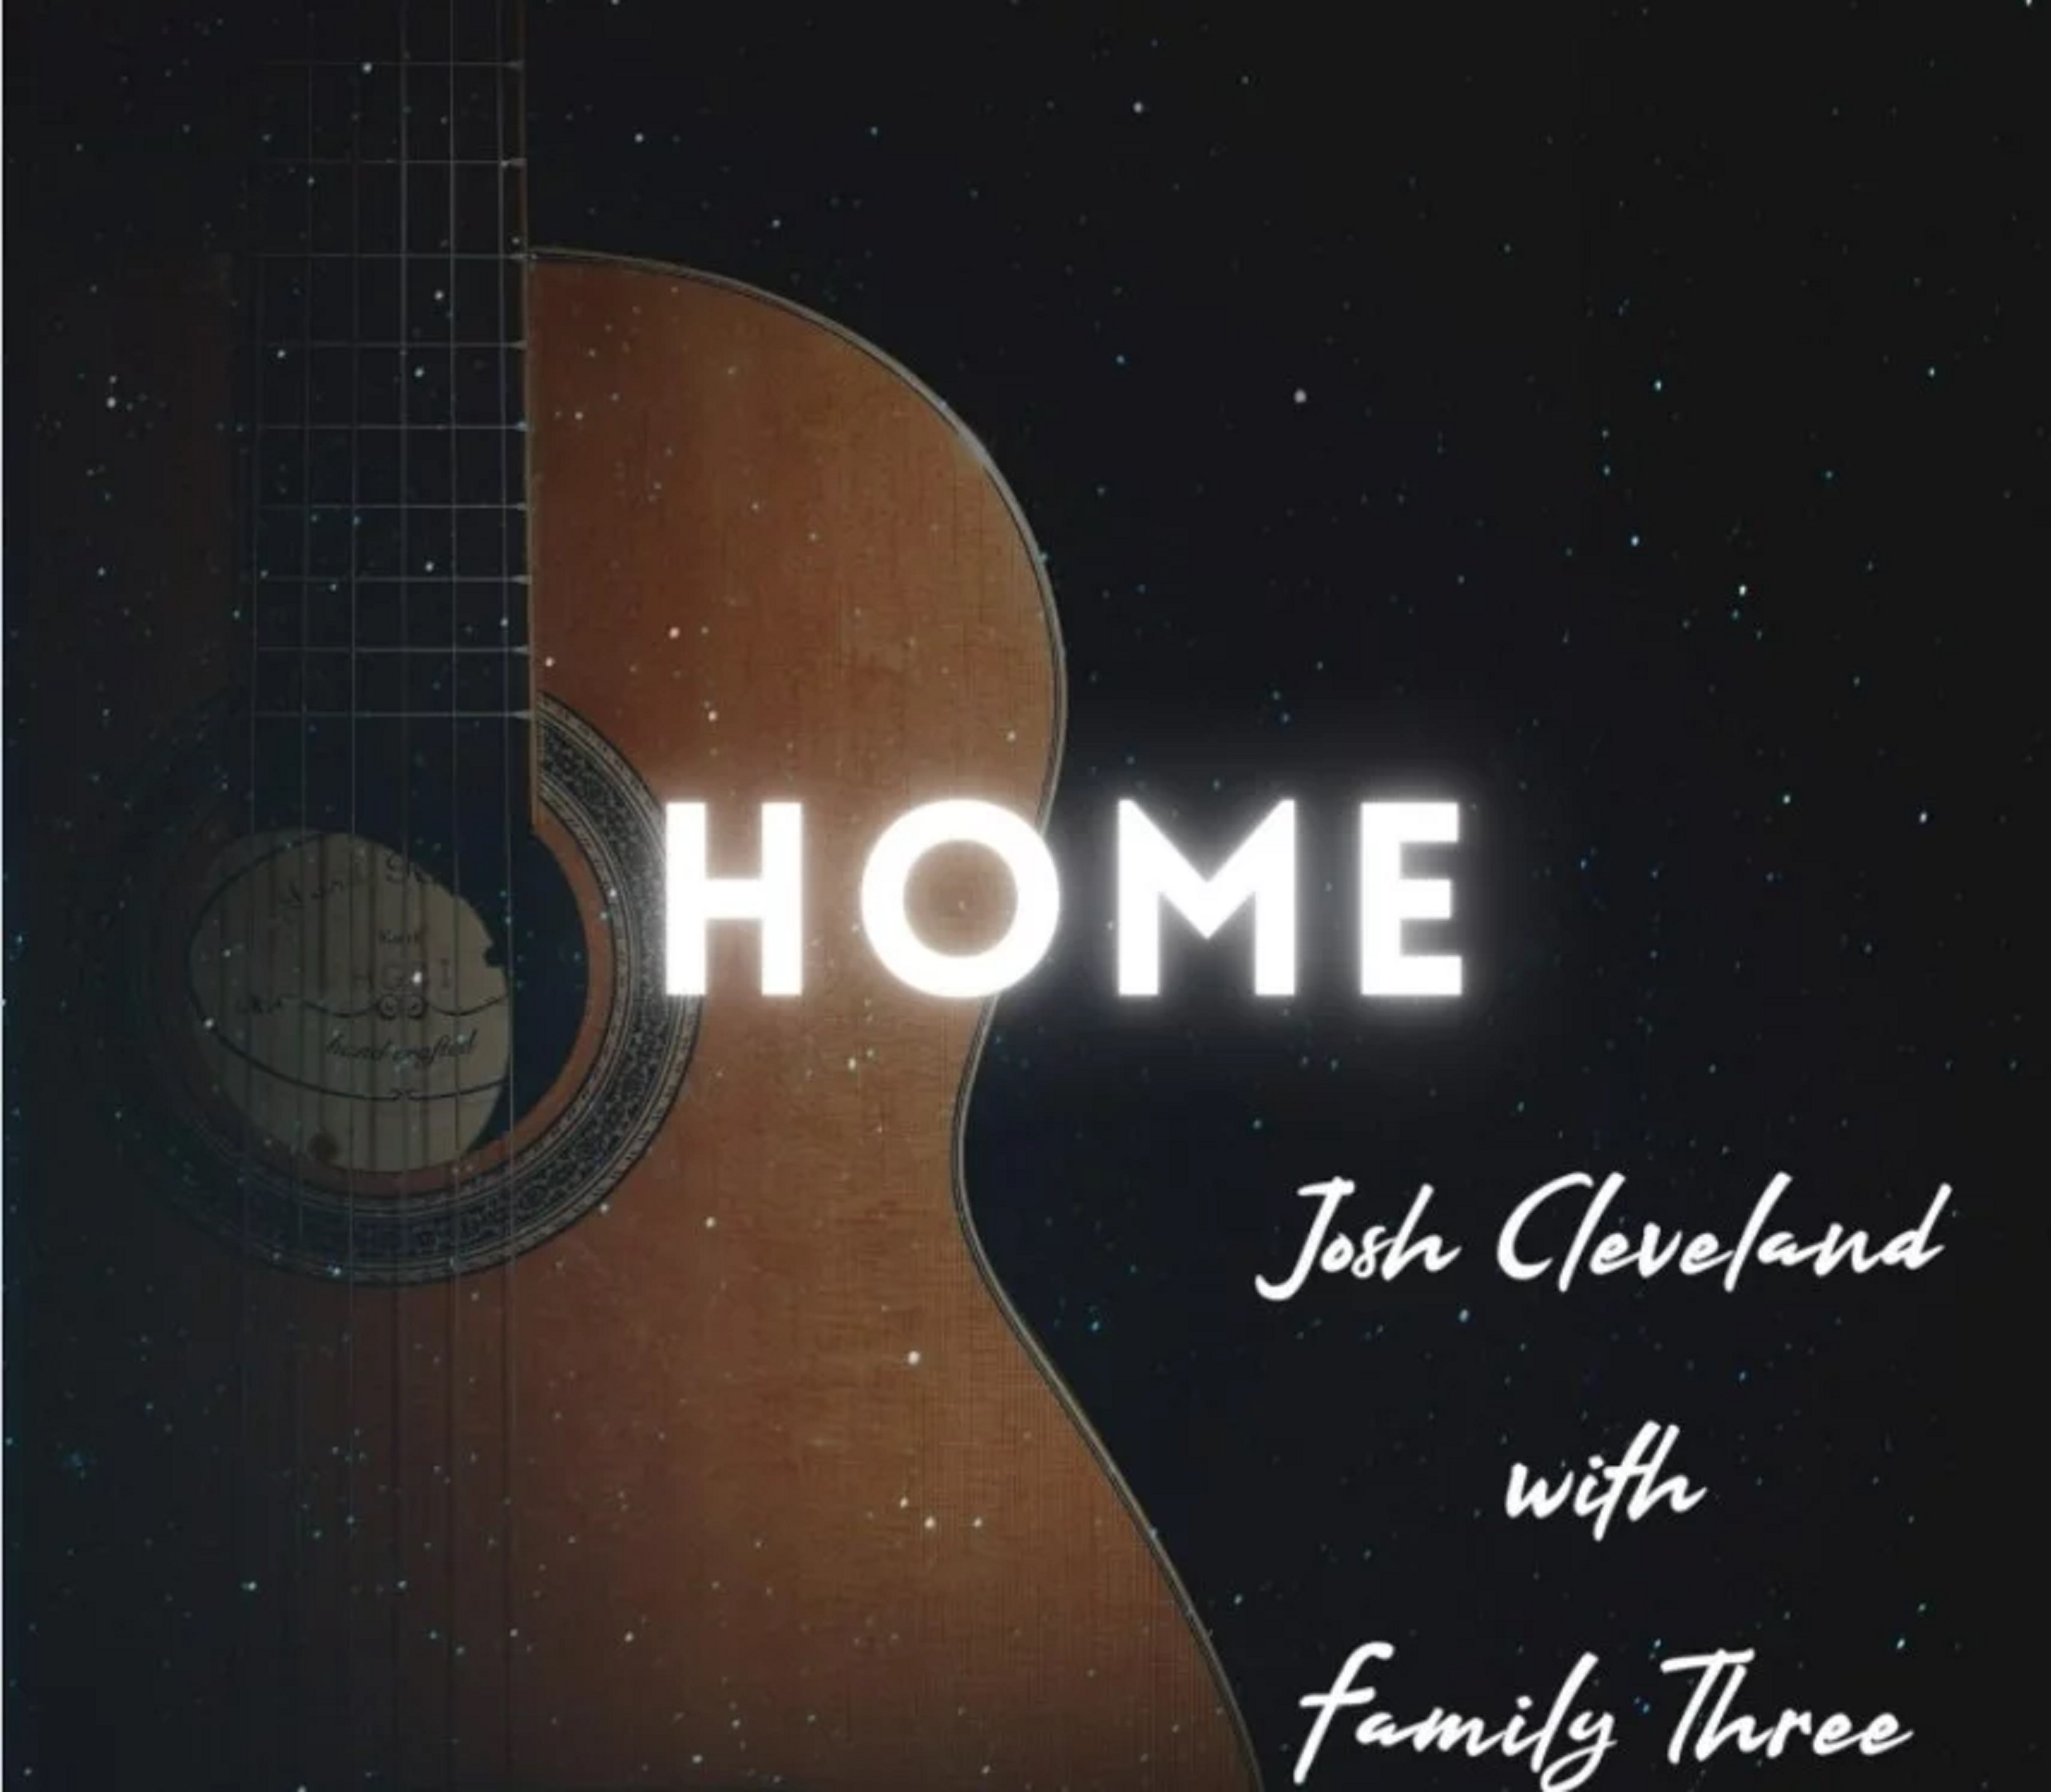 Josh Cleveland releases new track, "Home"